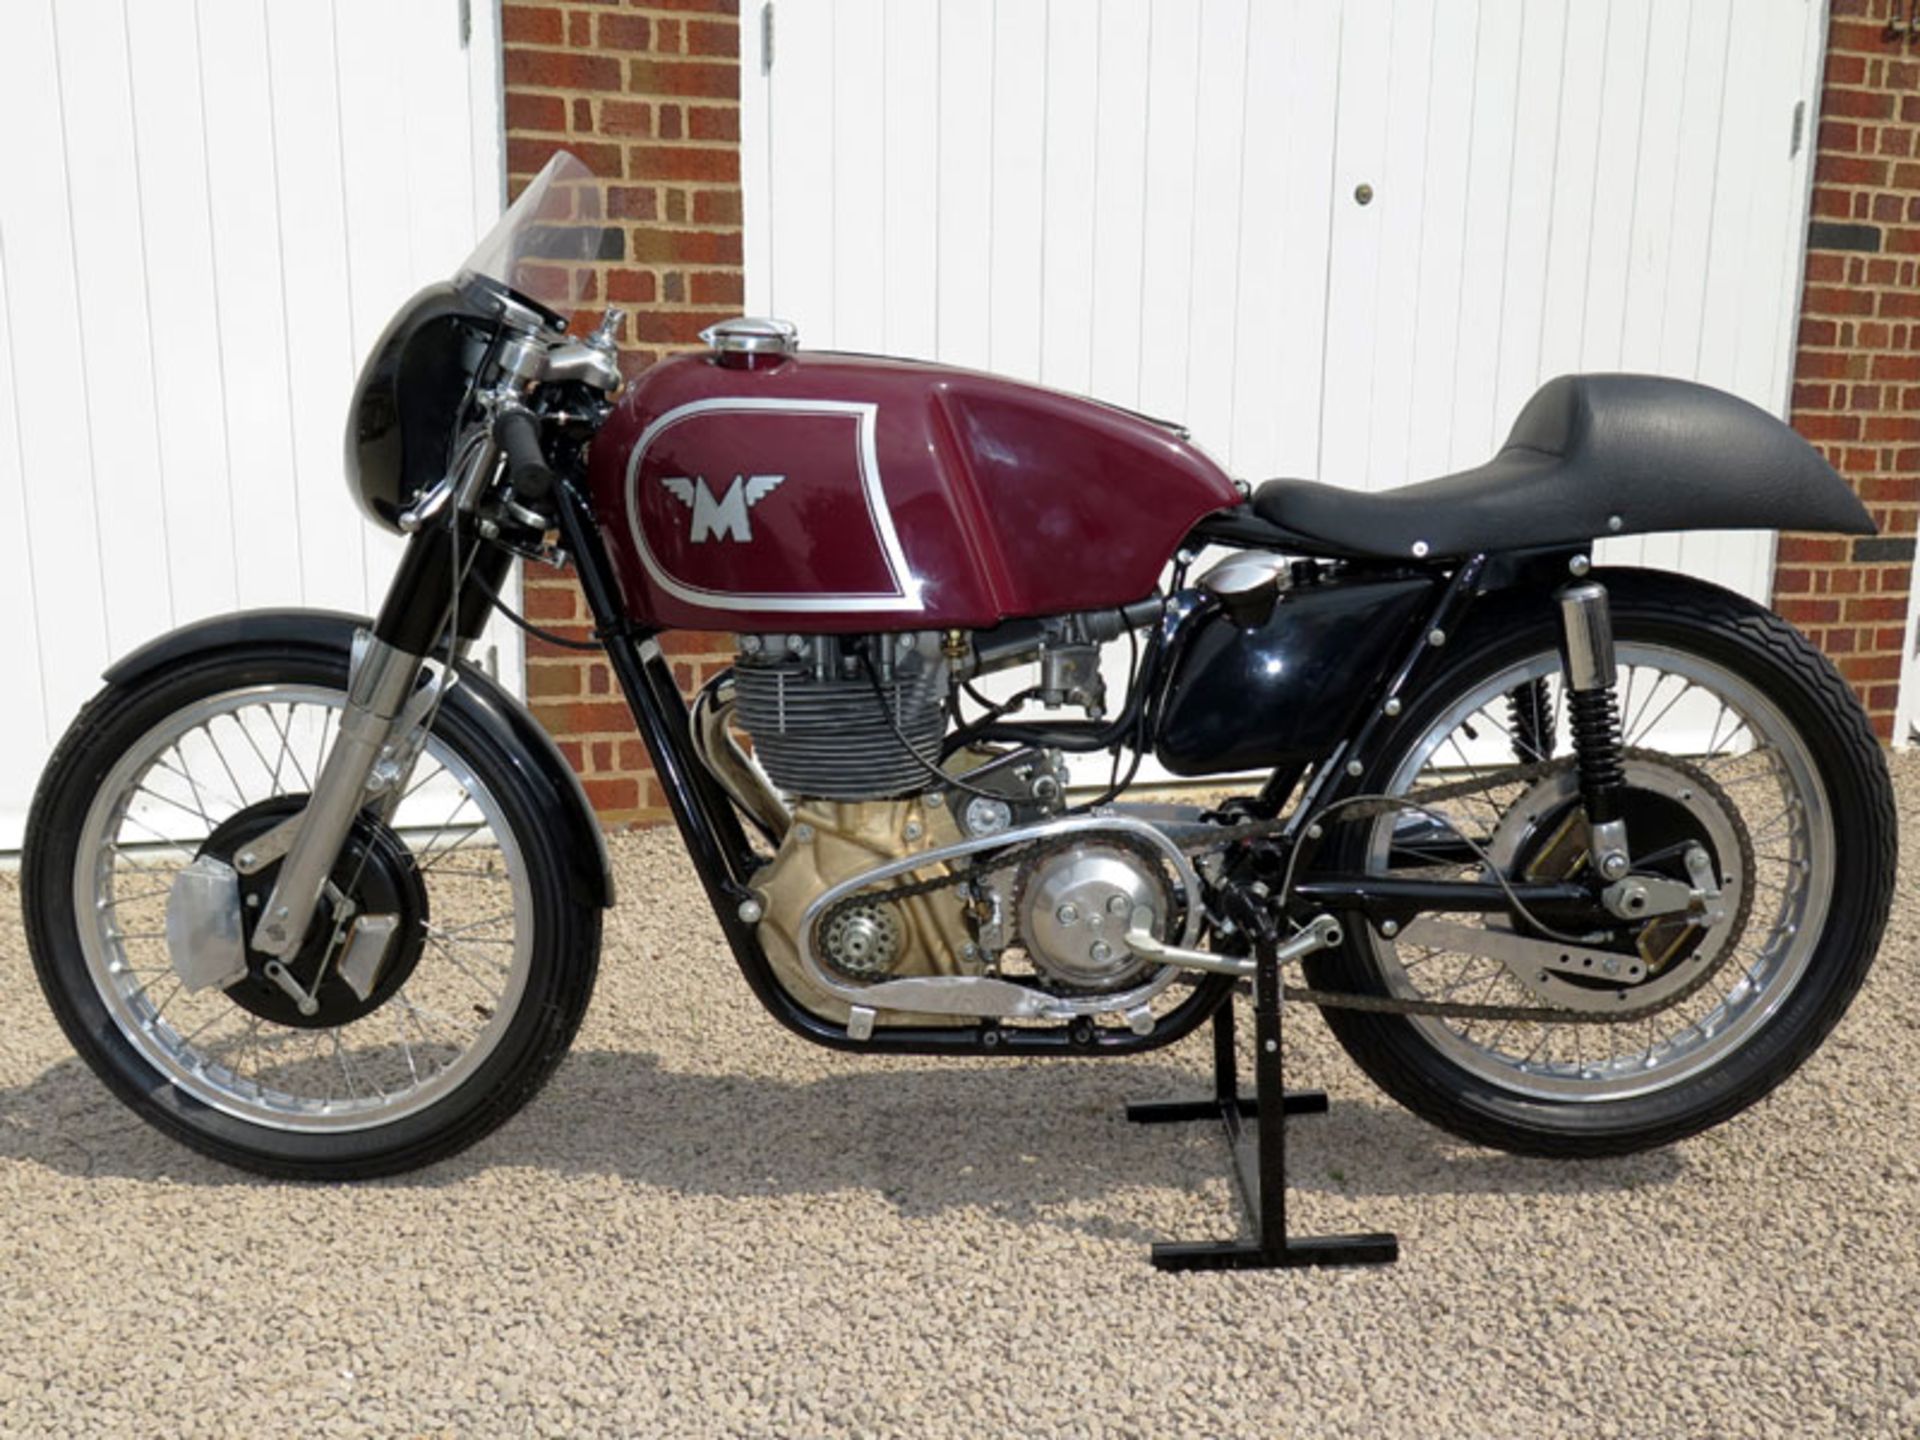 1959 Matchless G50 - Image 2 of 5